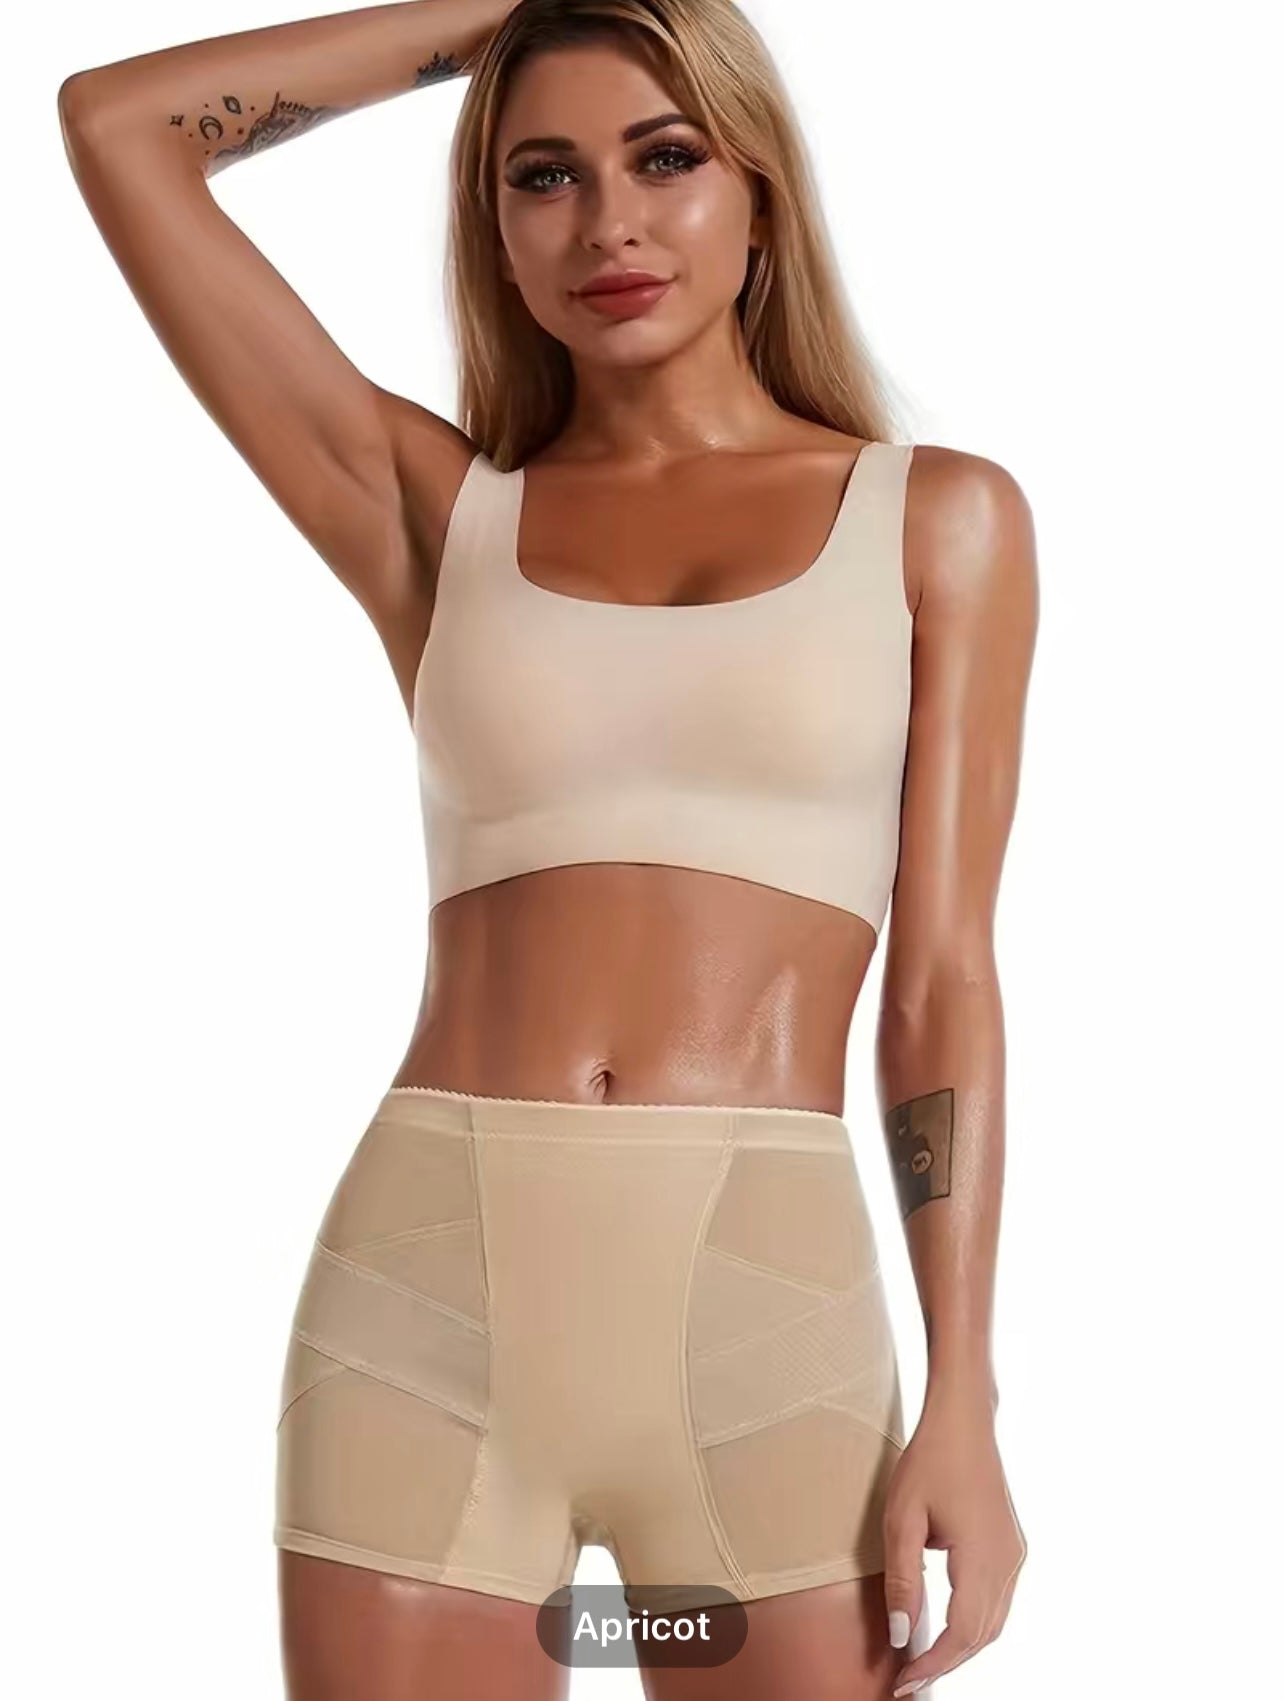 Seamless, Padded Butt Lifting Shape Wear. Buttocks Enhancing Sheer panties. High Waist BBL Shorts to and enhance your bootie. Comes in 2 colors Black or Nude. Made of polyester/mesh blend. full coverage, padded underwear. TikTok Viral booty shorts 